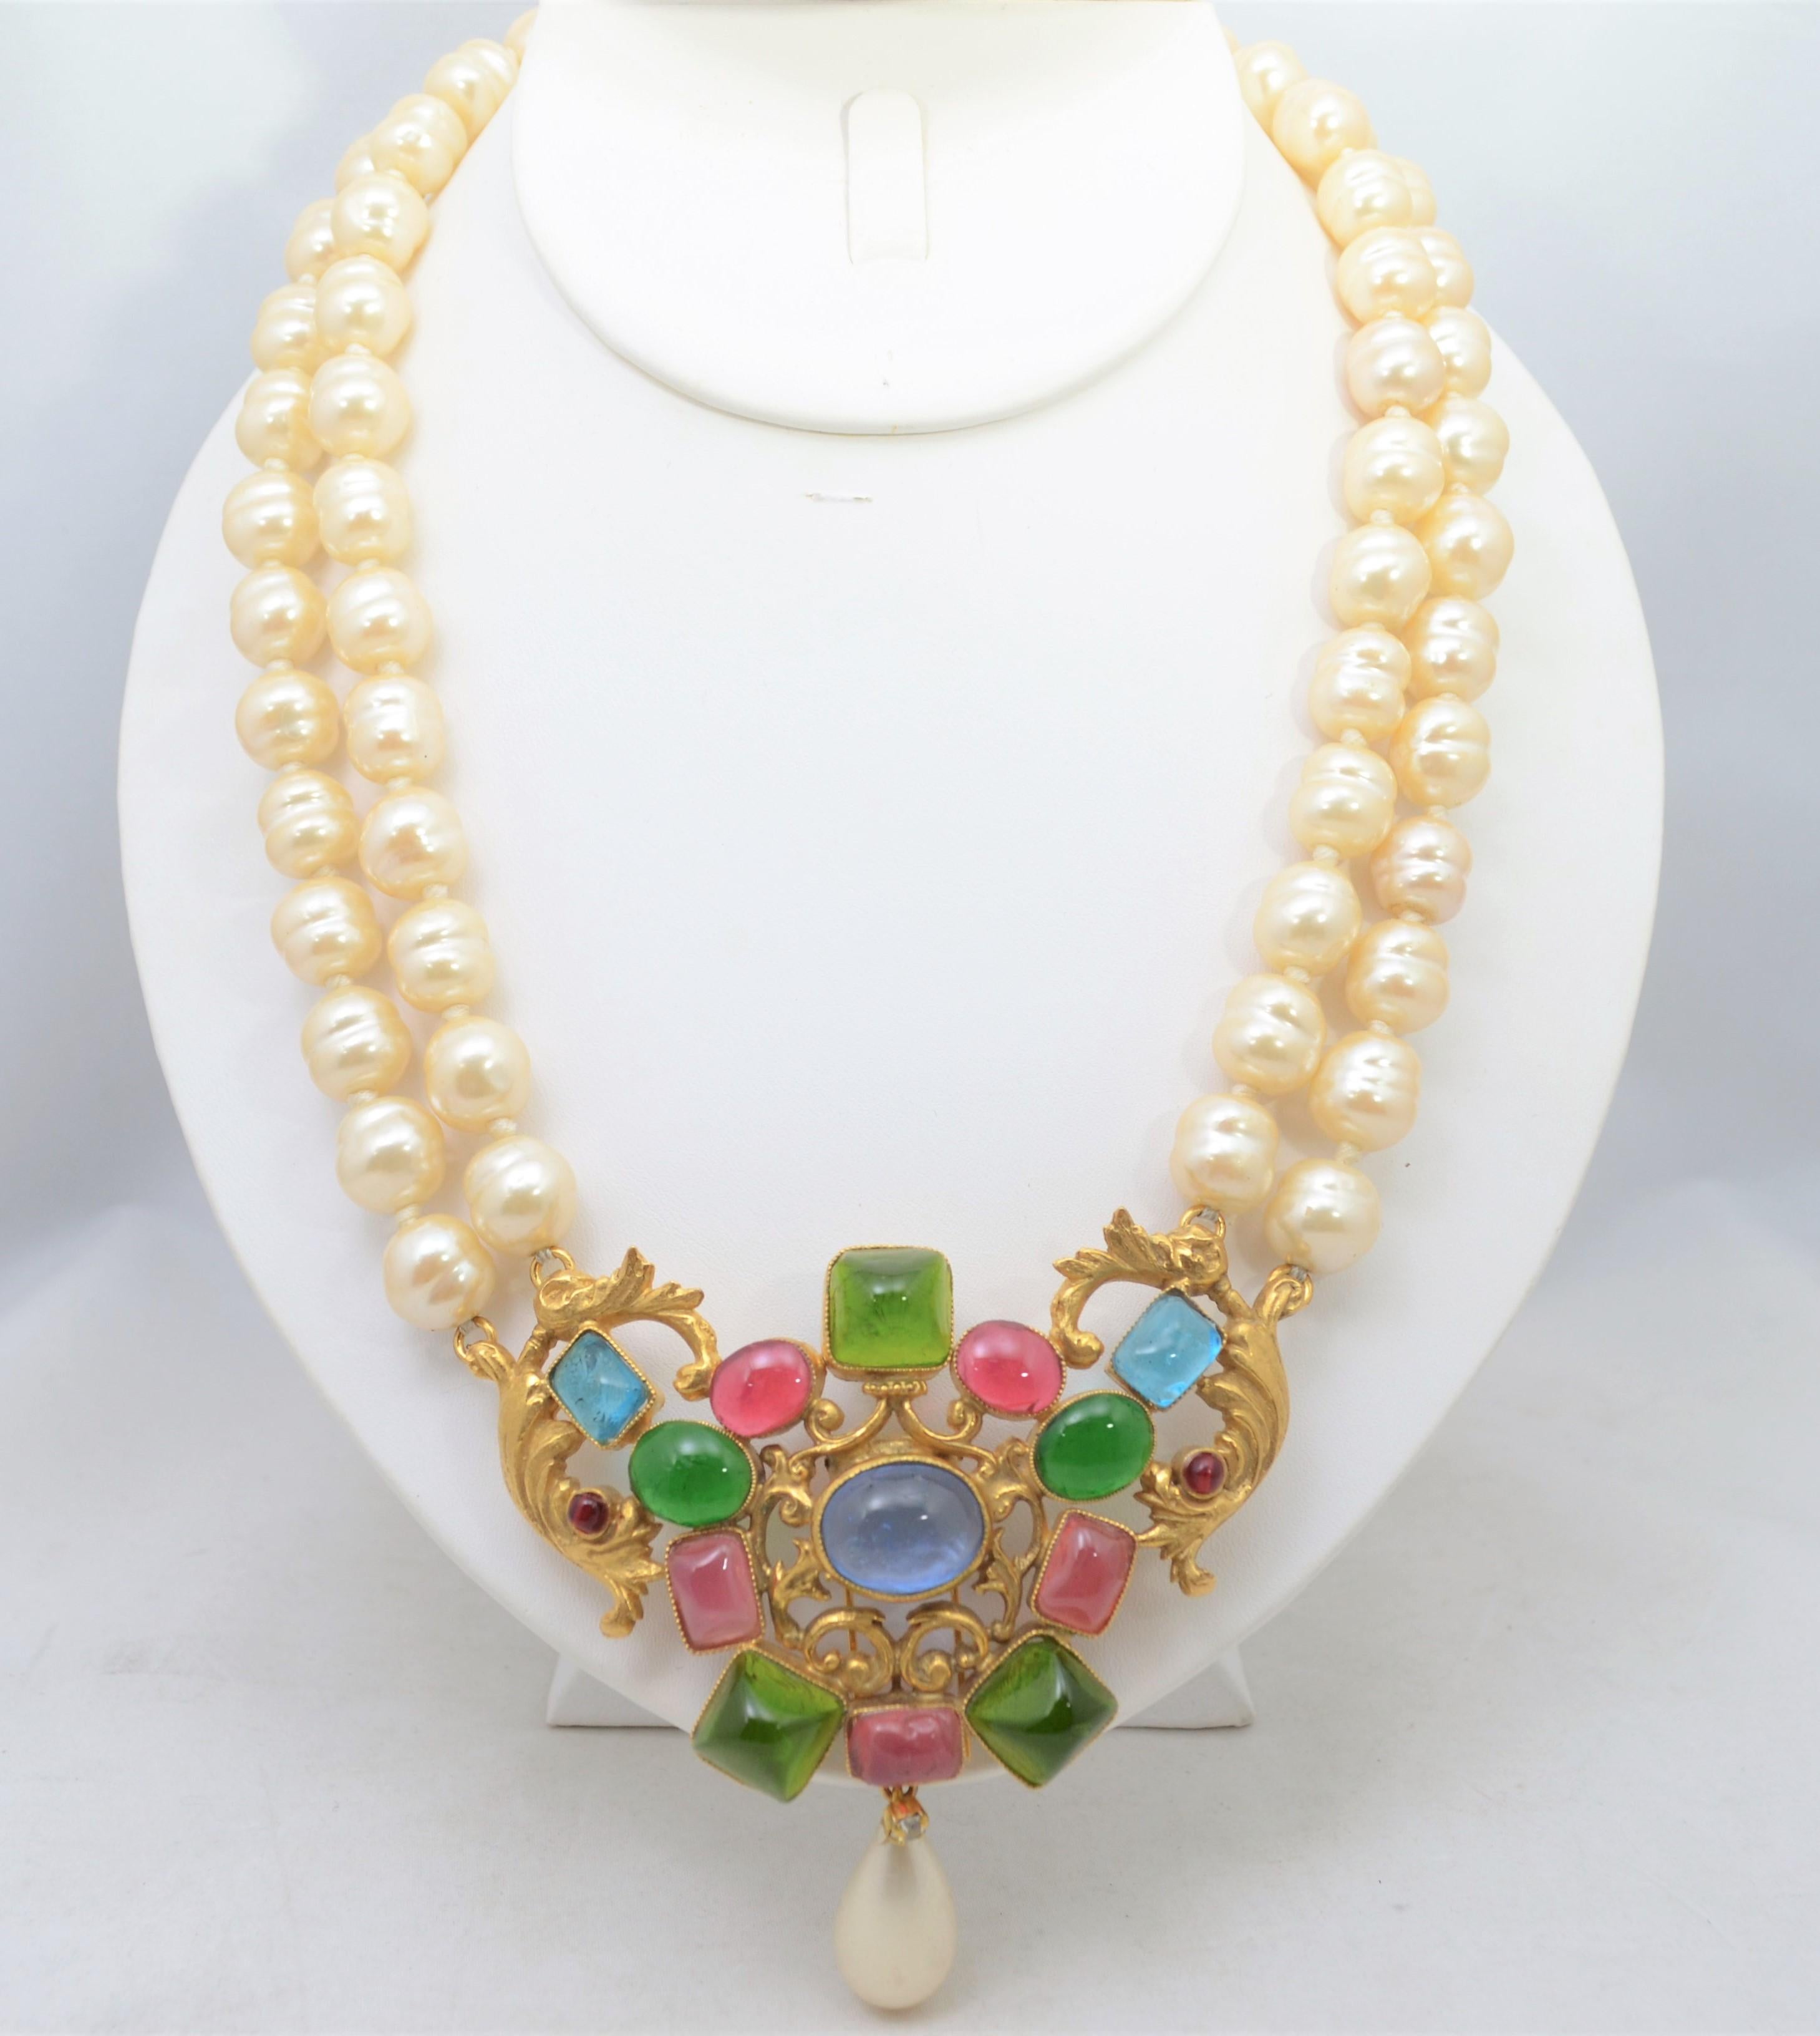 Amazing Chanel baroque pearl double-strand necklace from circa 1950's. Necklace has a gold-tone metal center with glass gripoix stones set in and a hook closure. Gripoix cluster pendant was a fur pin and has been restrung as a necklace. Necklace is